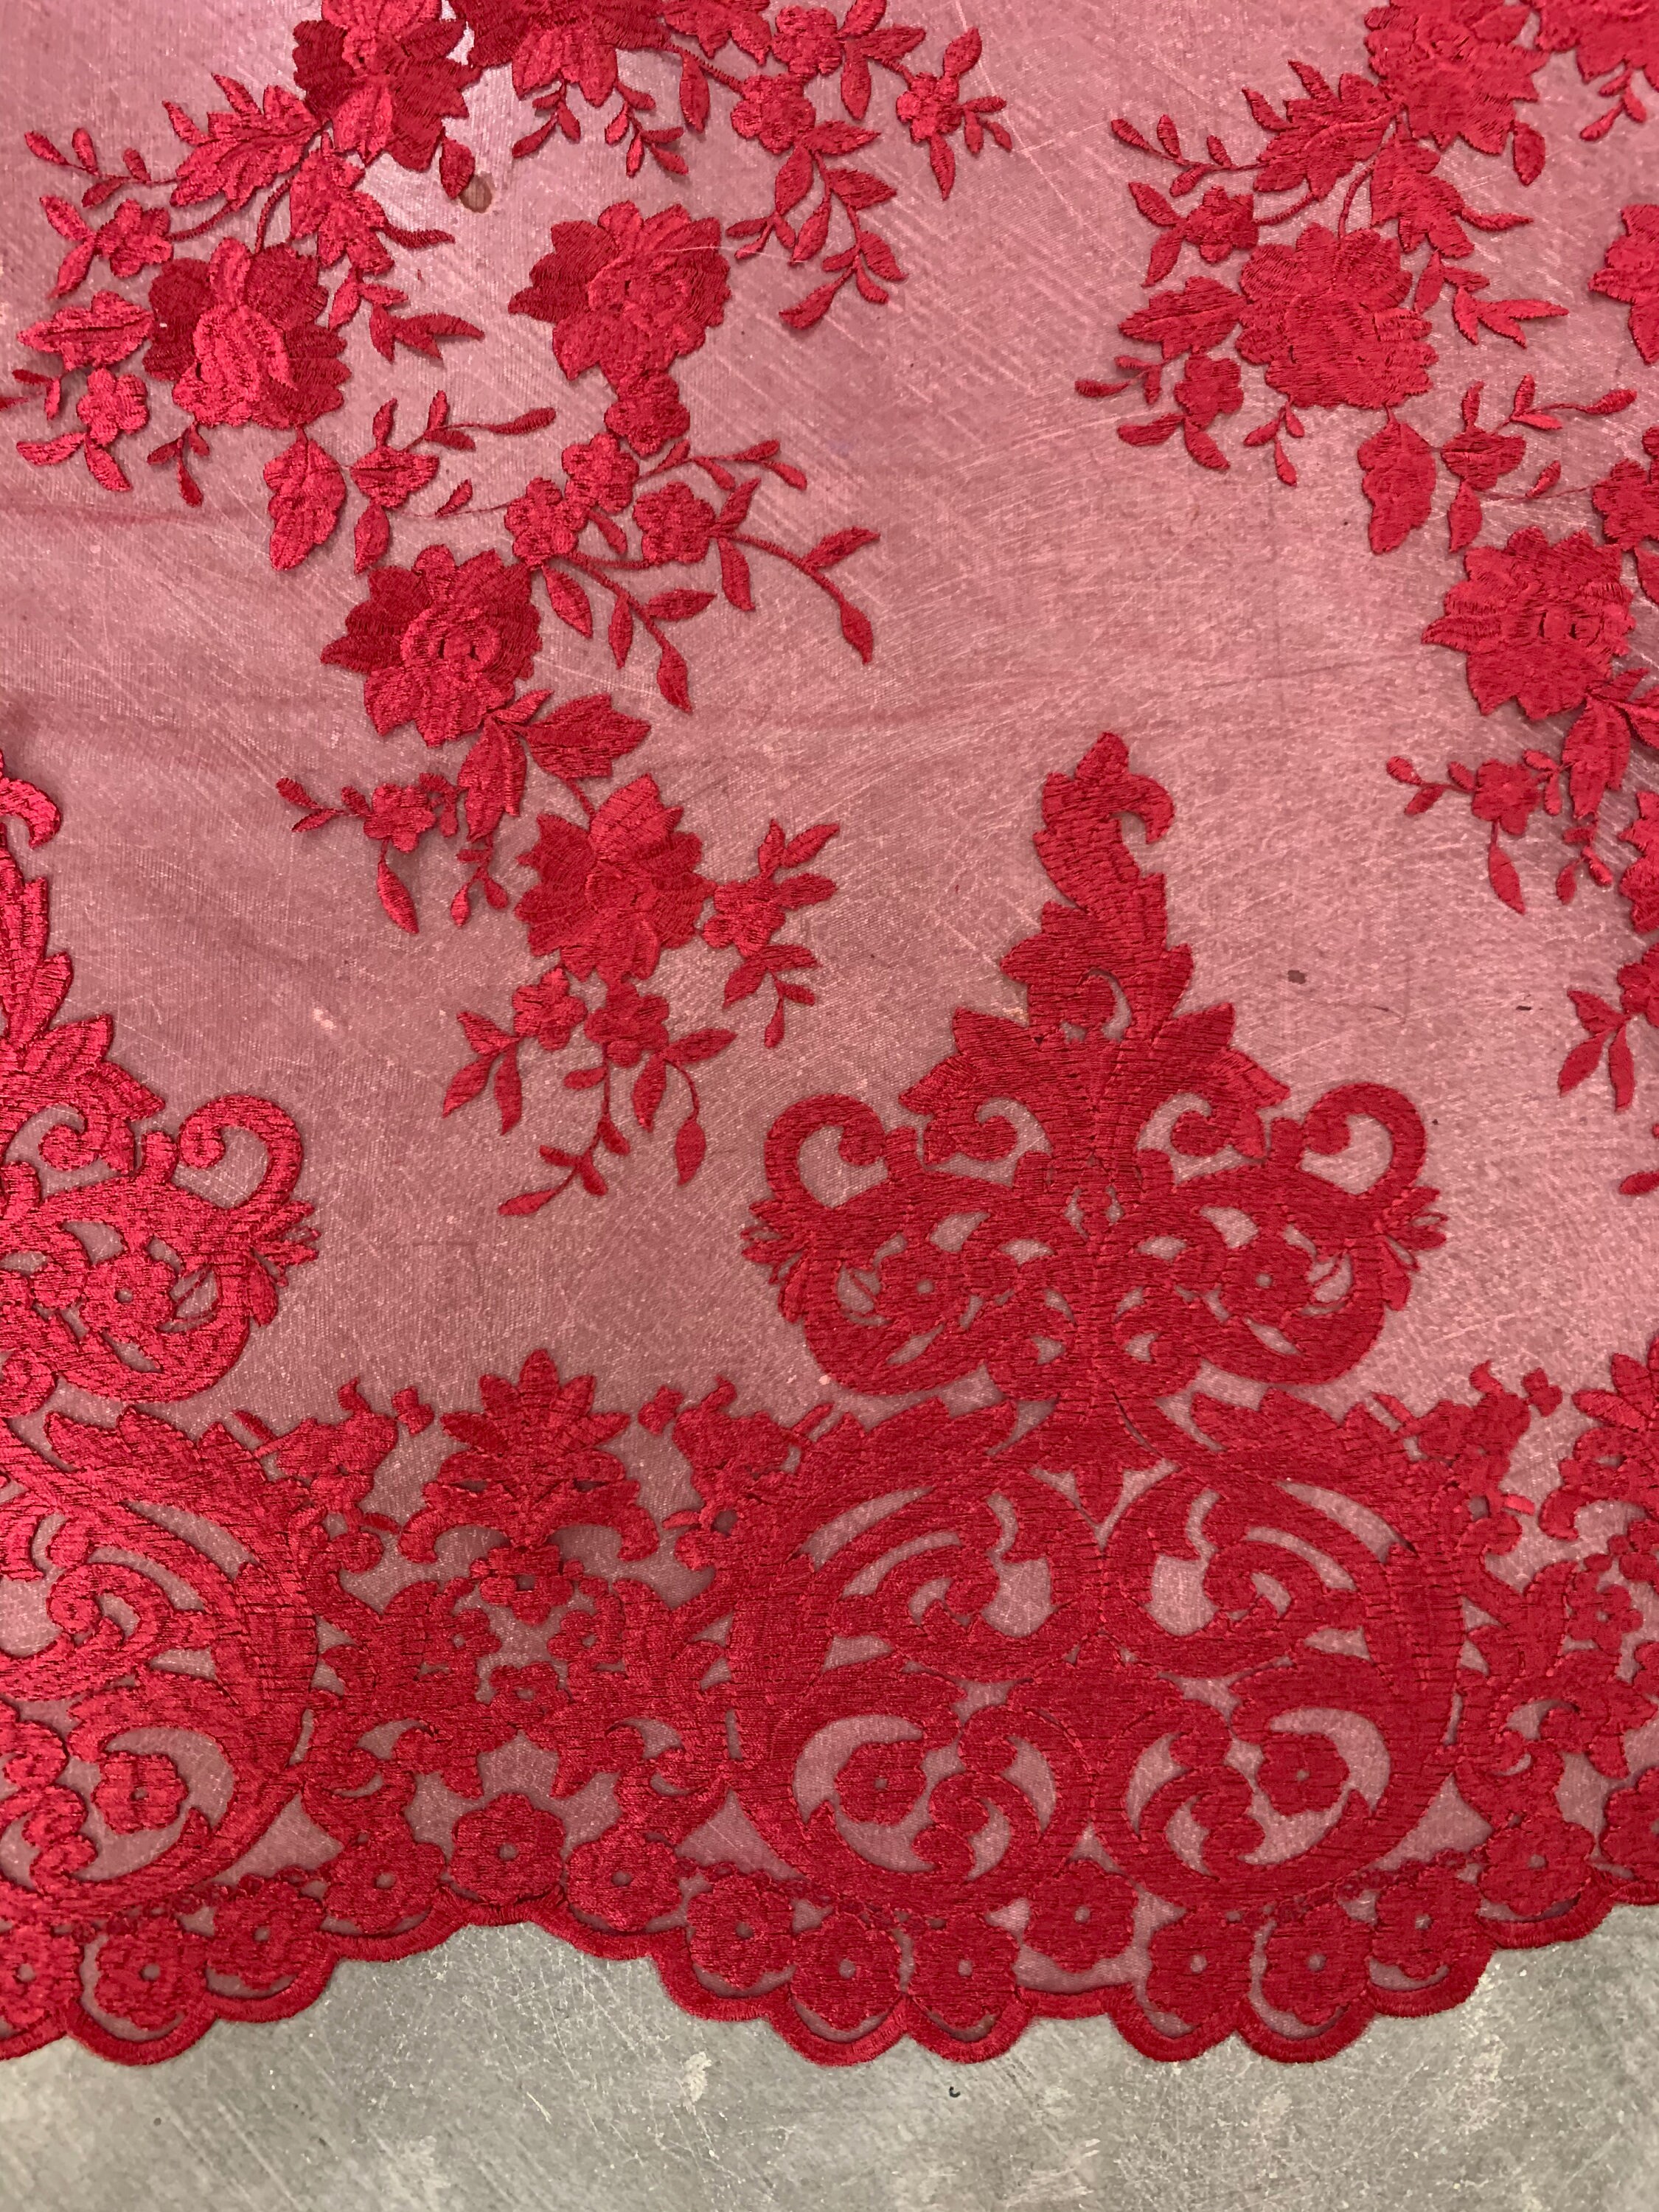 Teagan BURGUNDY Damask Design Embroidered on Mesh Lace Fabric - Etsy